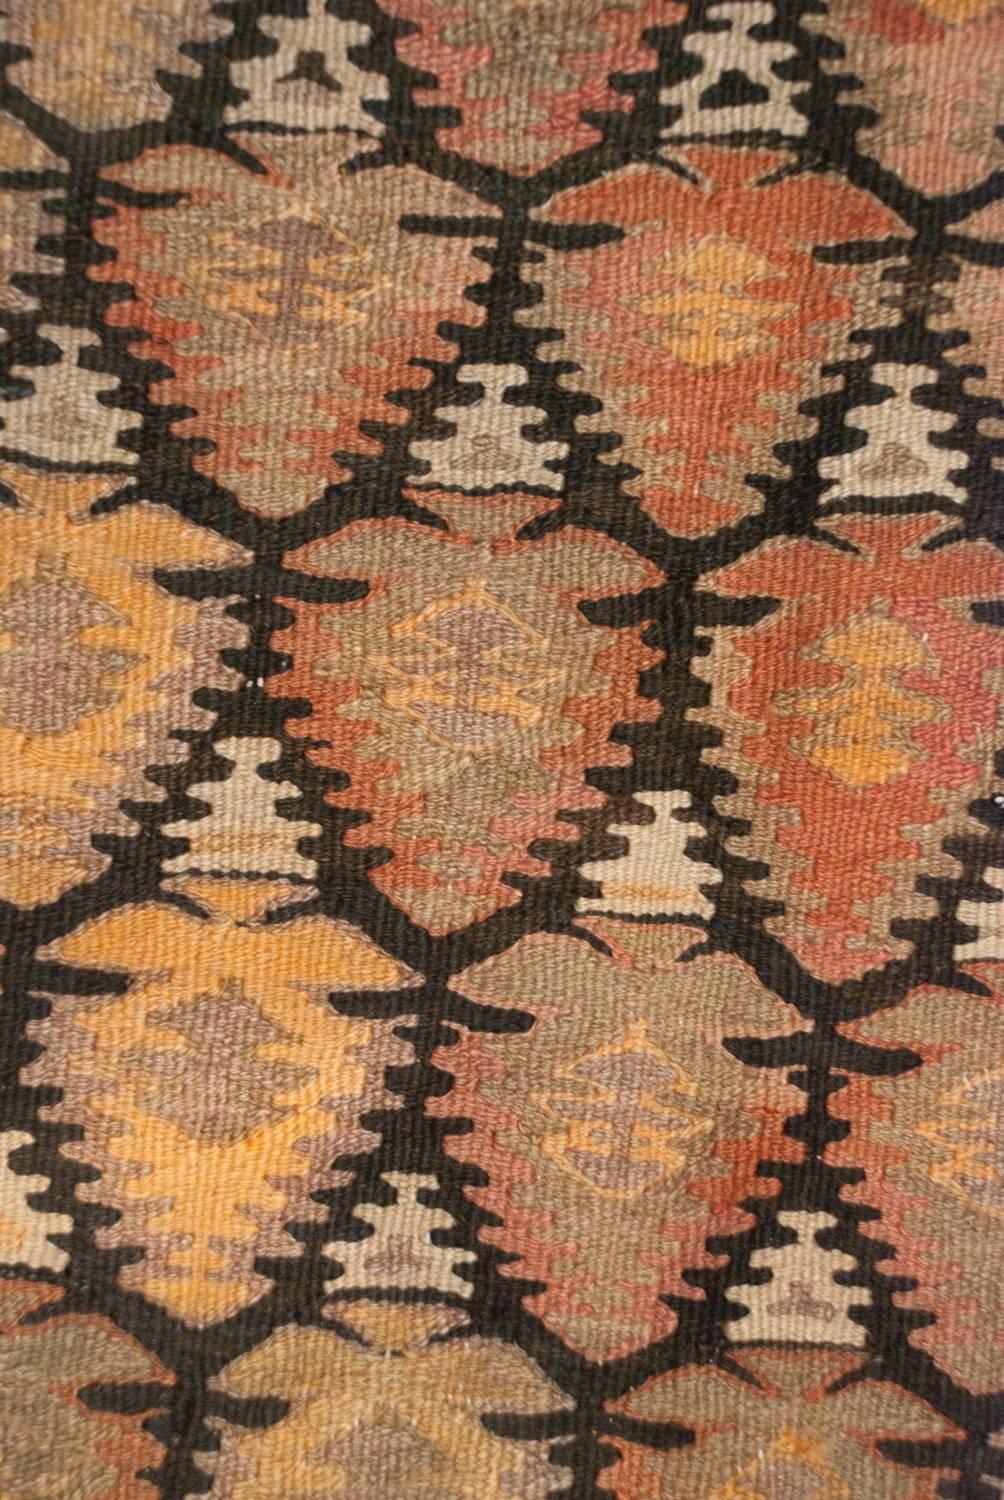 An early 20th century Persian Qazvin Kilim runner with a beautiful all-over multicolored stylized tree-of-life pattern on a black background. The border is comprised of three distinct multicolored geometric patterns.